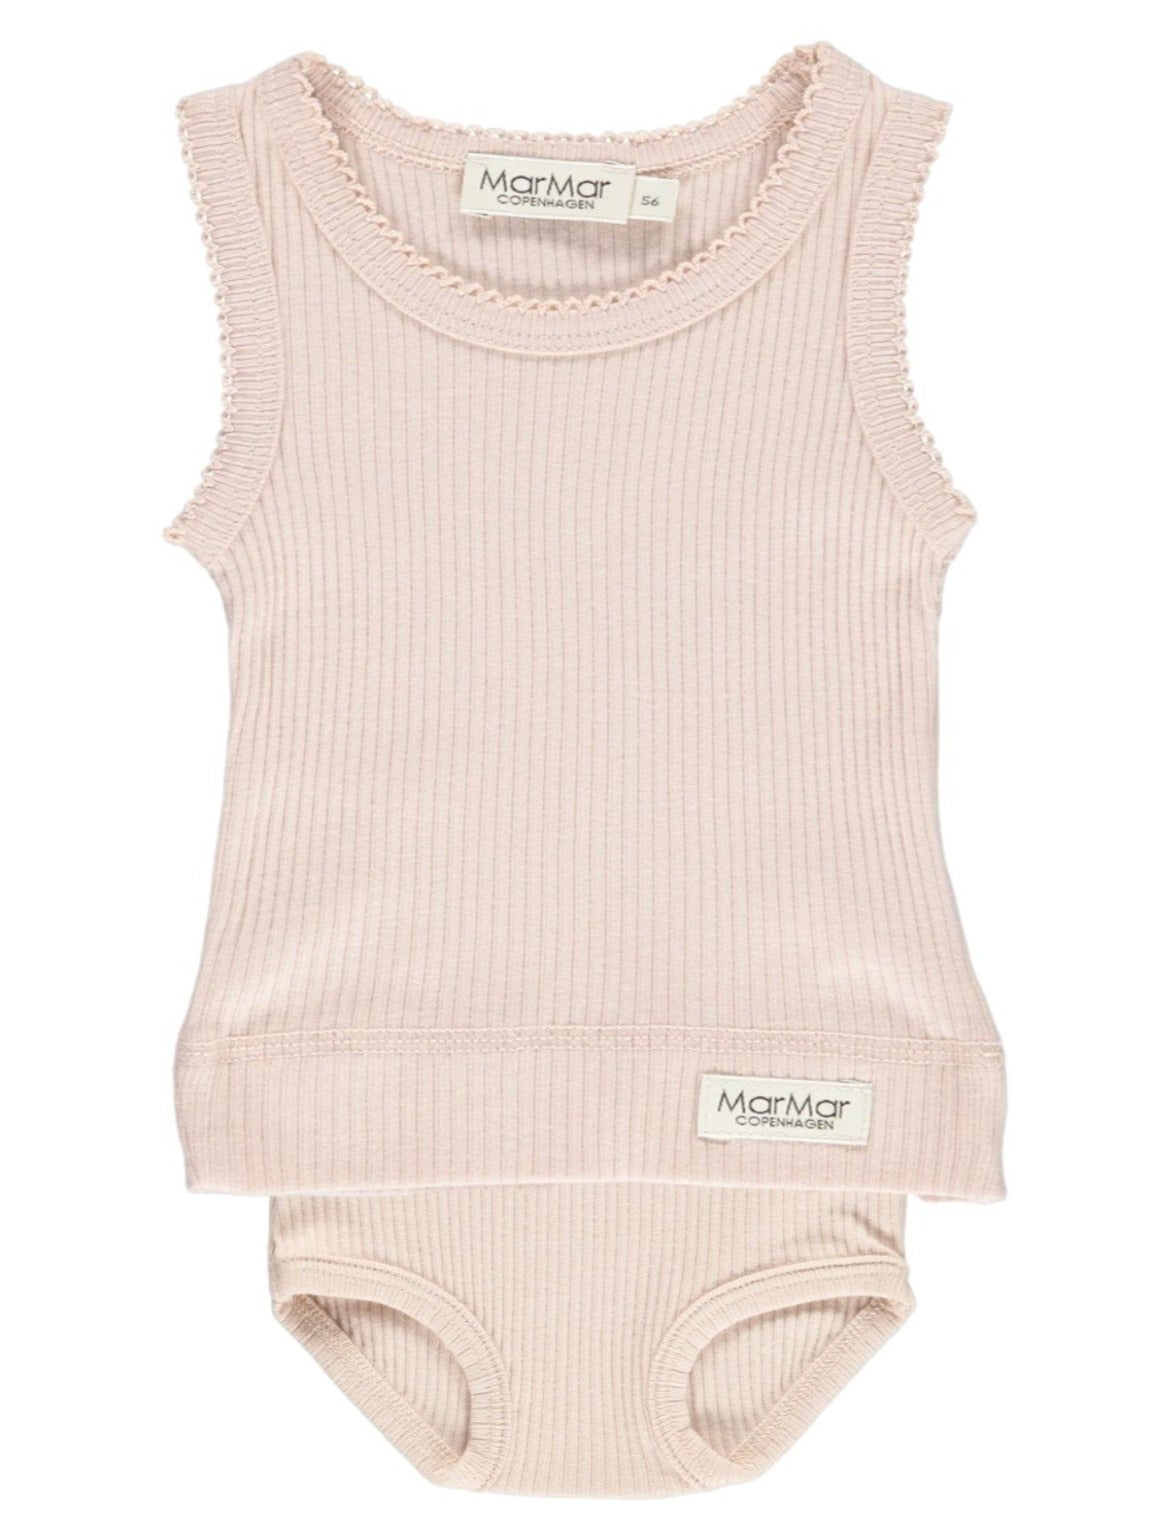 MarMar Baby Girl 2PC Tank Outfit Set